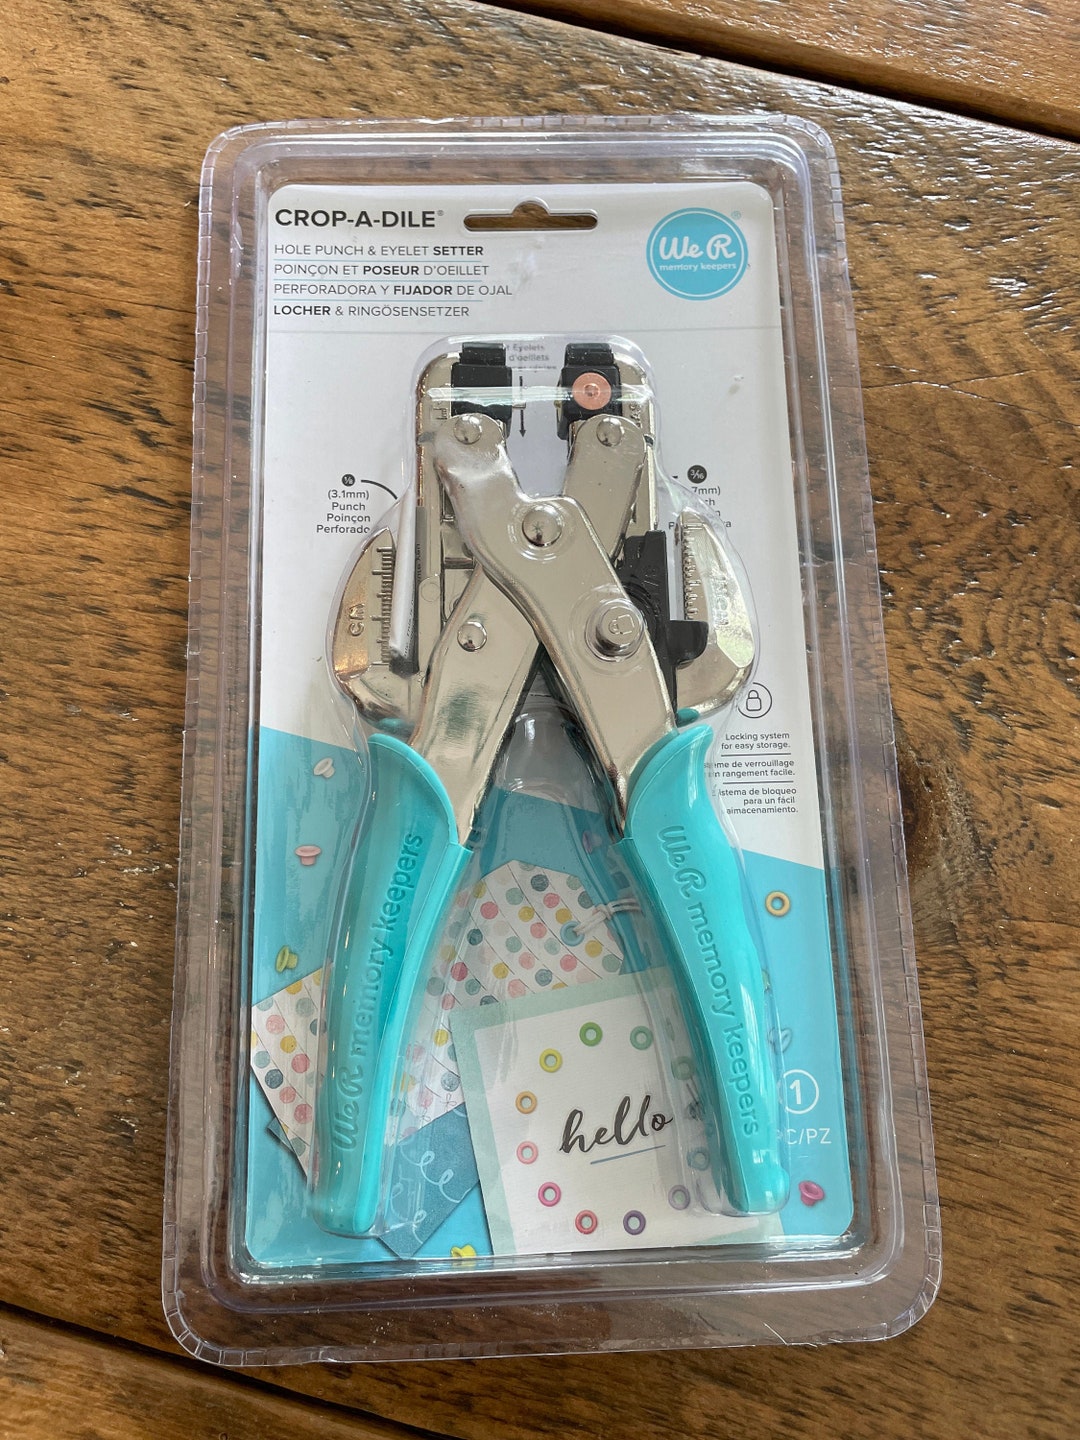 We R Memory Keepers Crop-a-dile Hole Punch & Eyelet Setter 